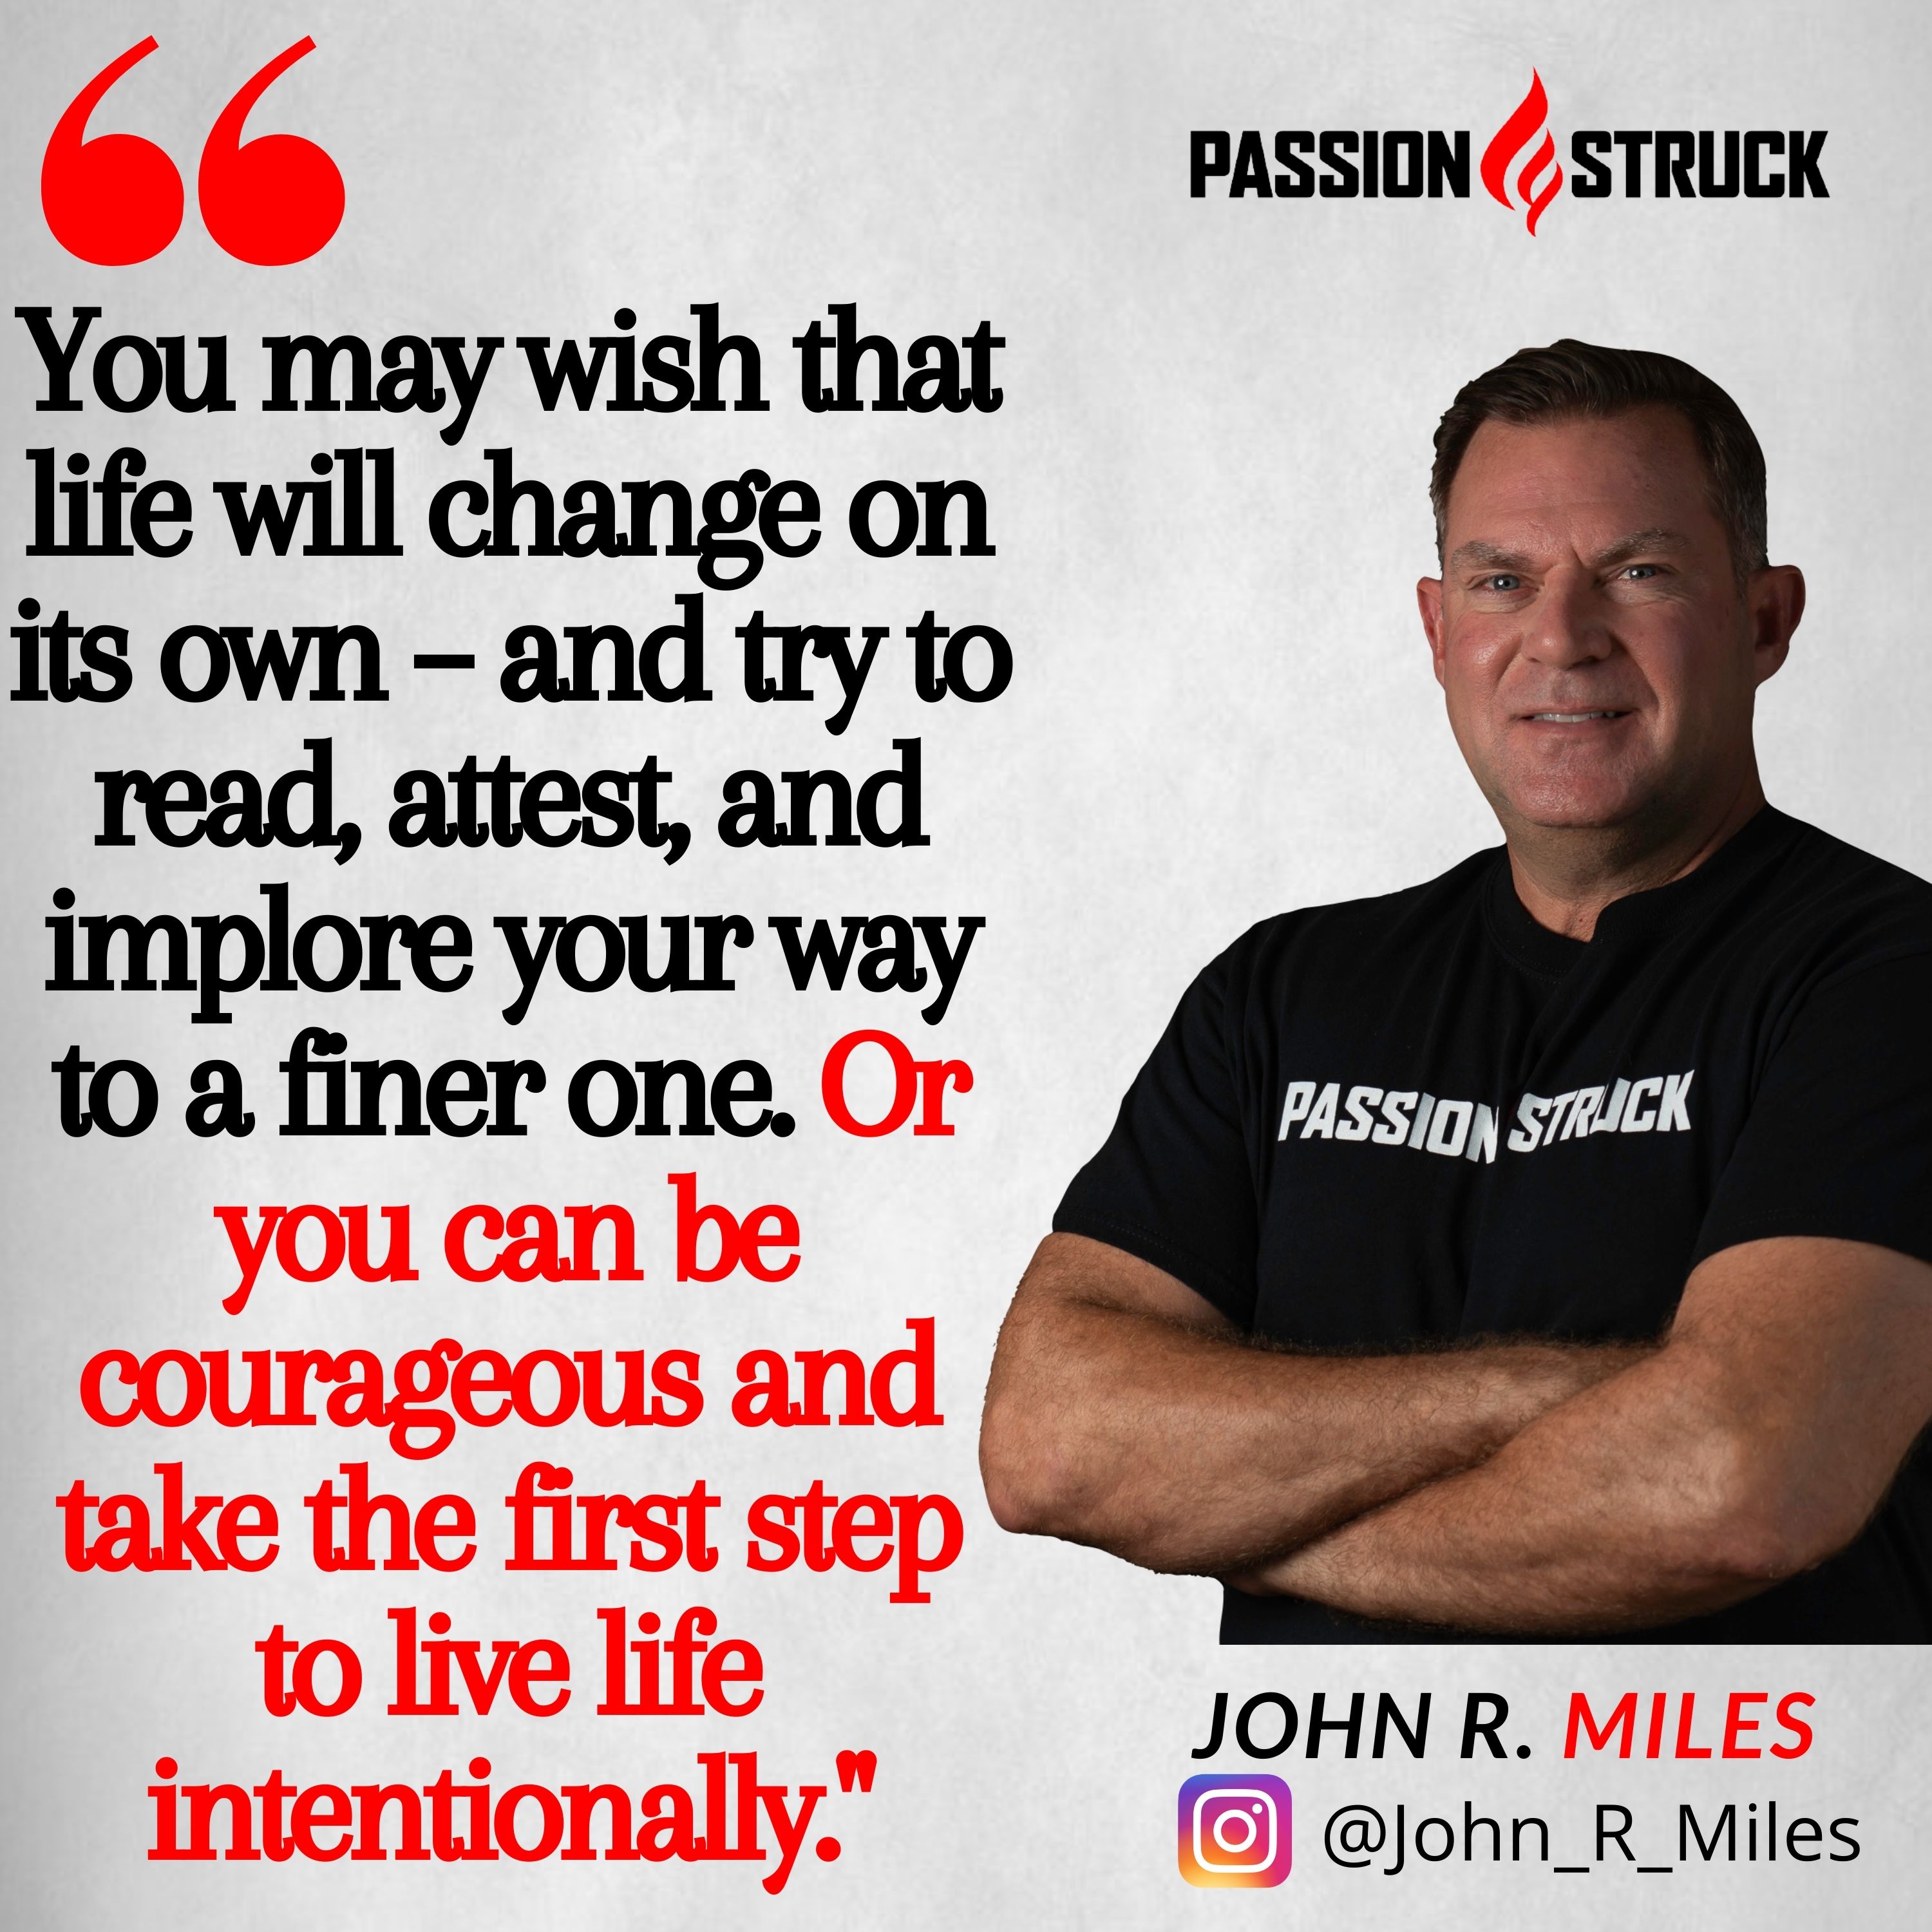 Quote by John R. Miles on peak experiences